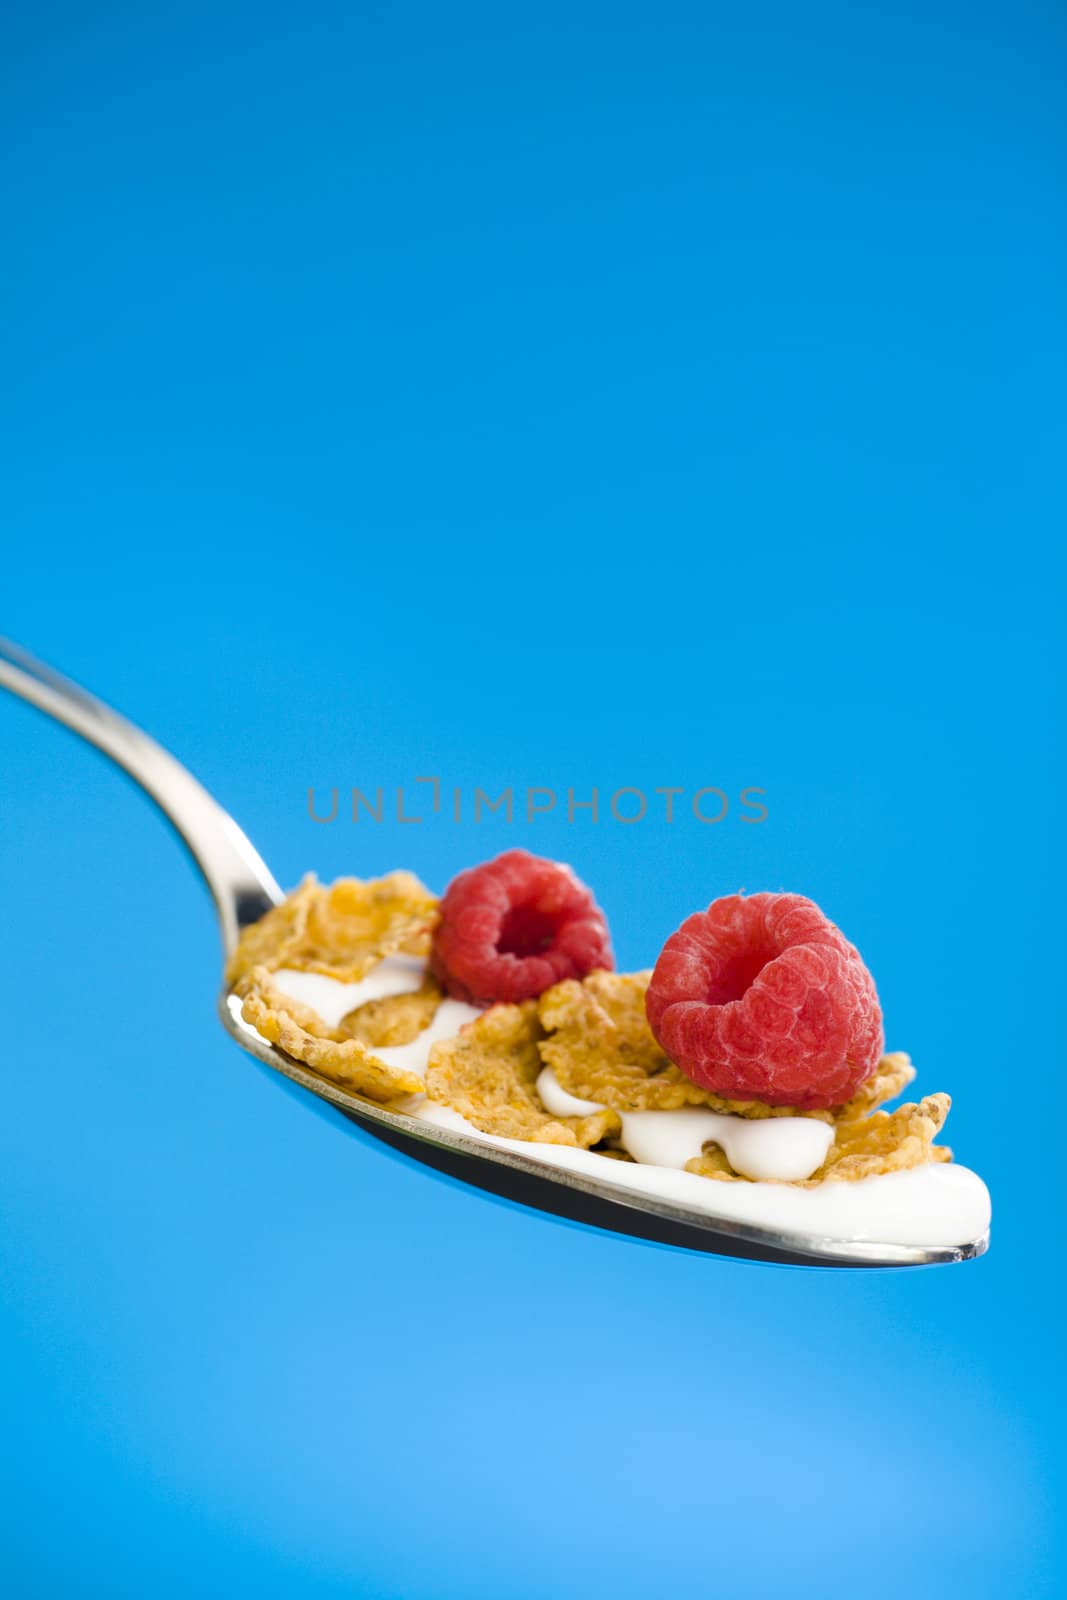 Corn flakes on the spoon with milk over a blue background